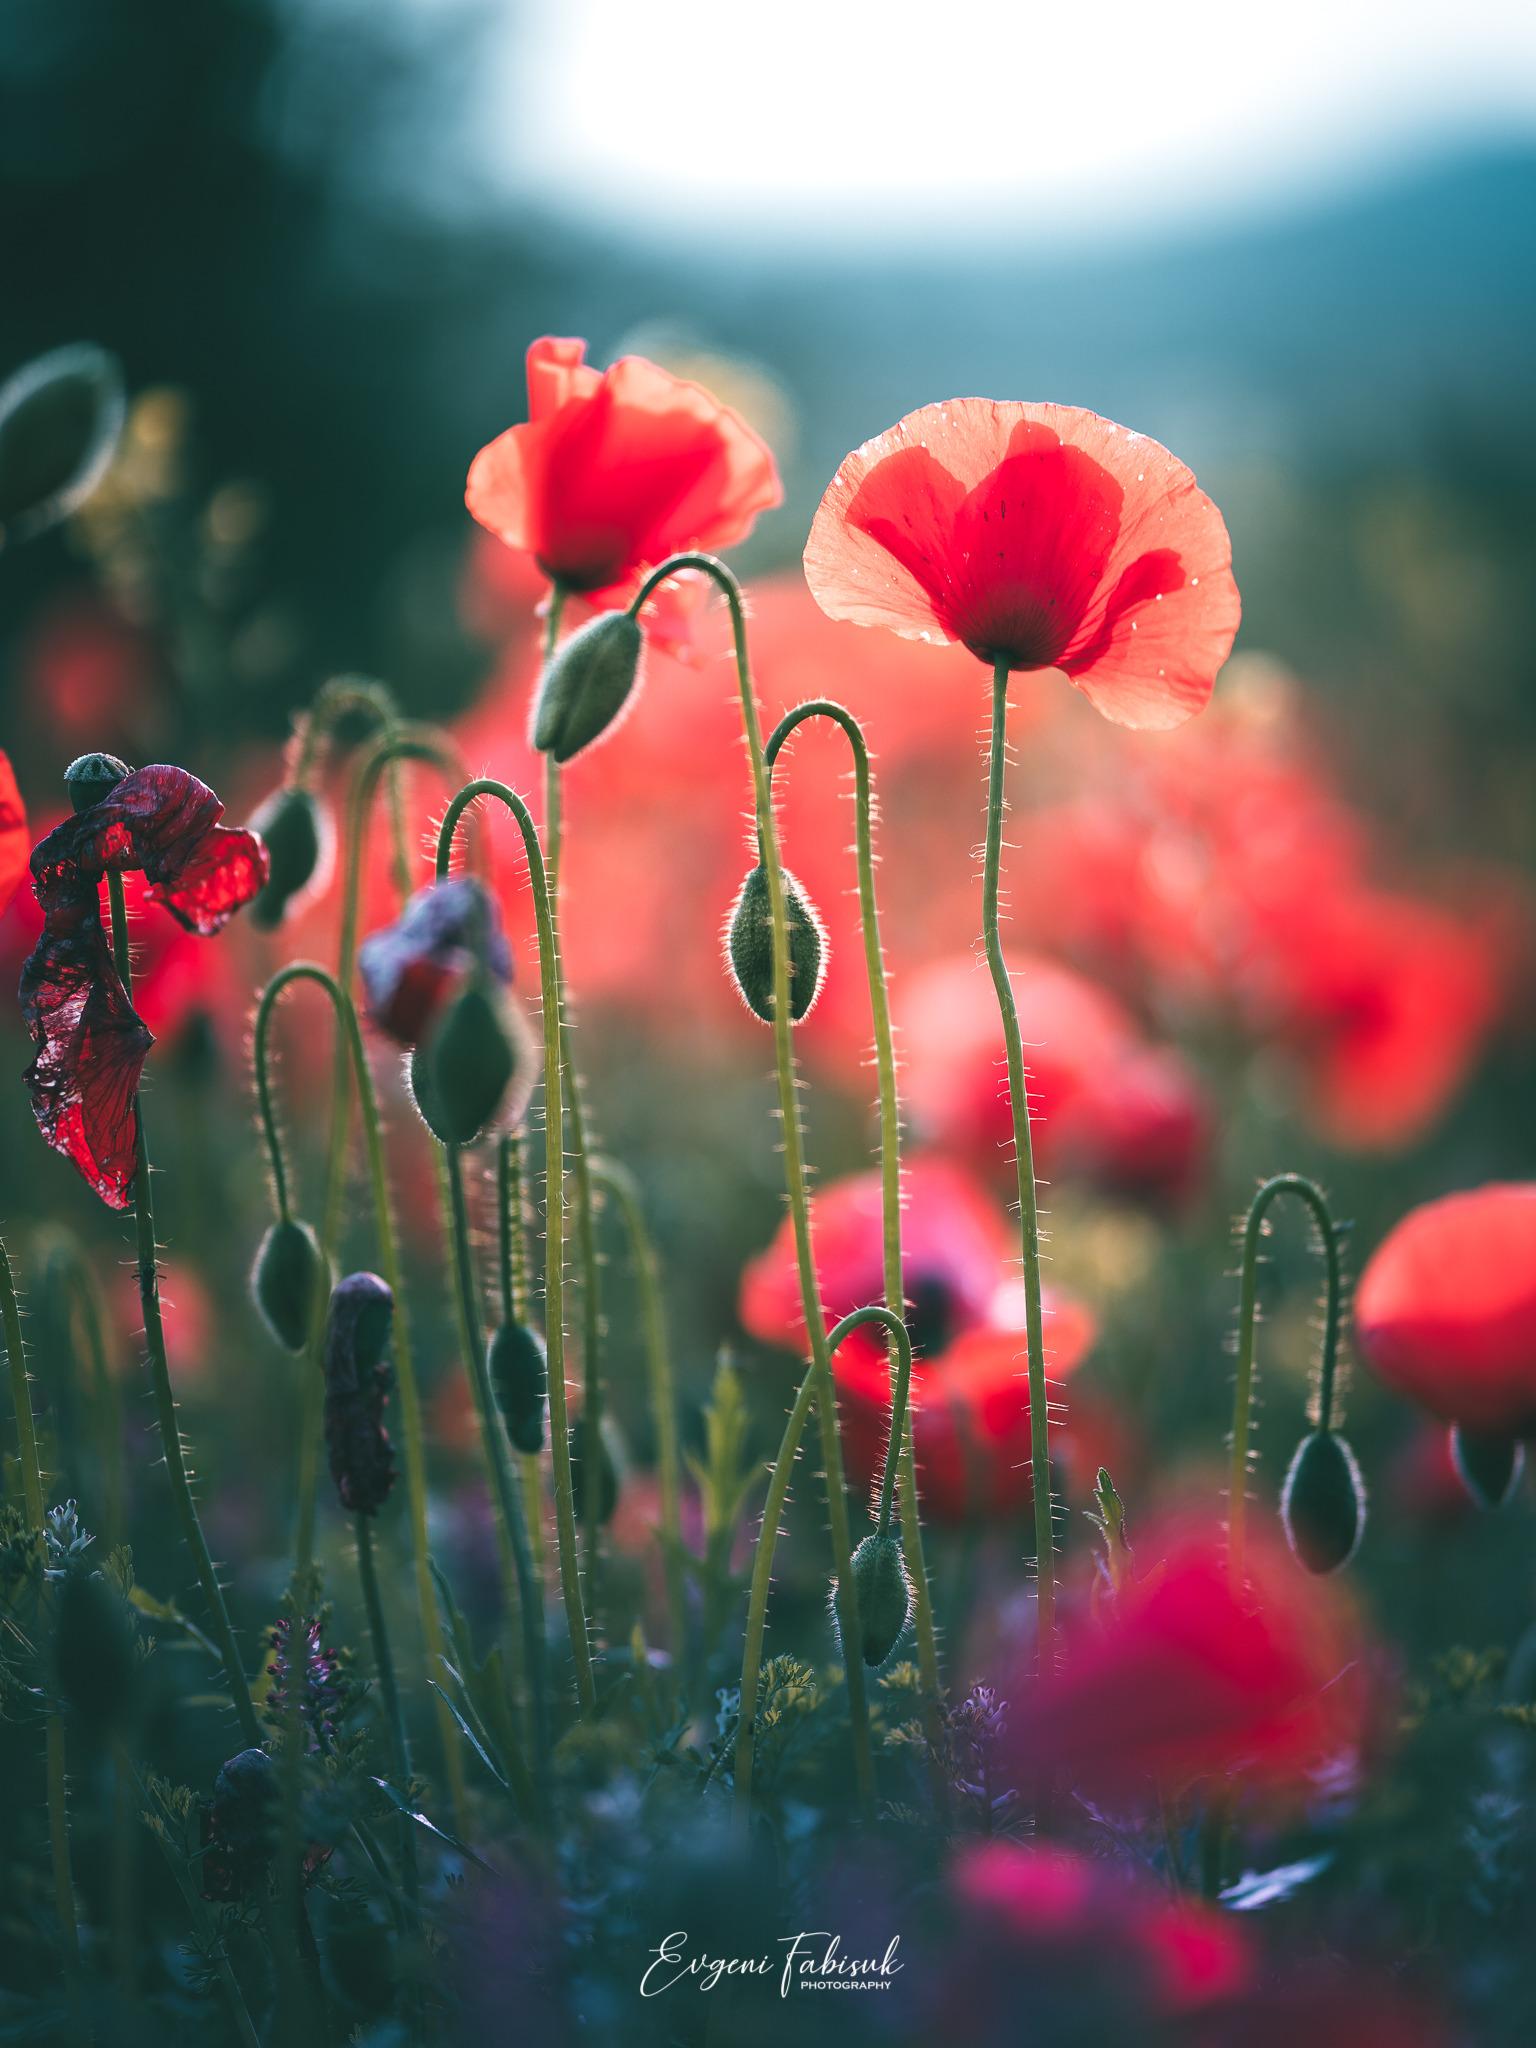 HD wallpaper, Grass, Landscape, Red, Photography, Field, Plants, Leaves, Green, Flowers, Nature, Poppies, Evgeni Fabisuk